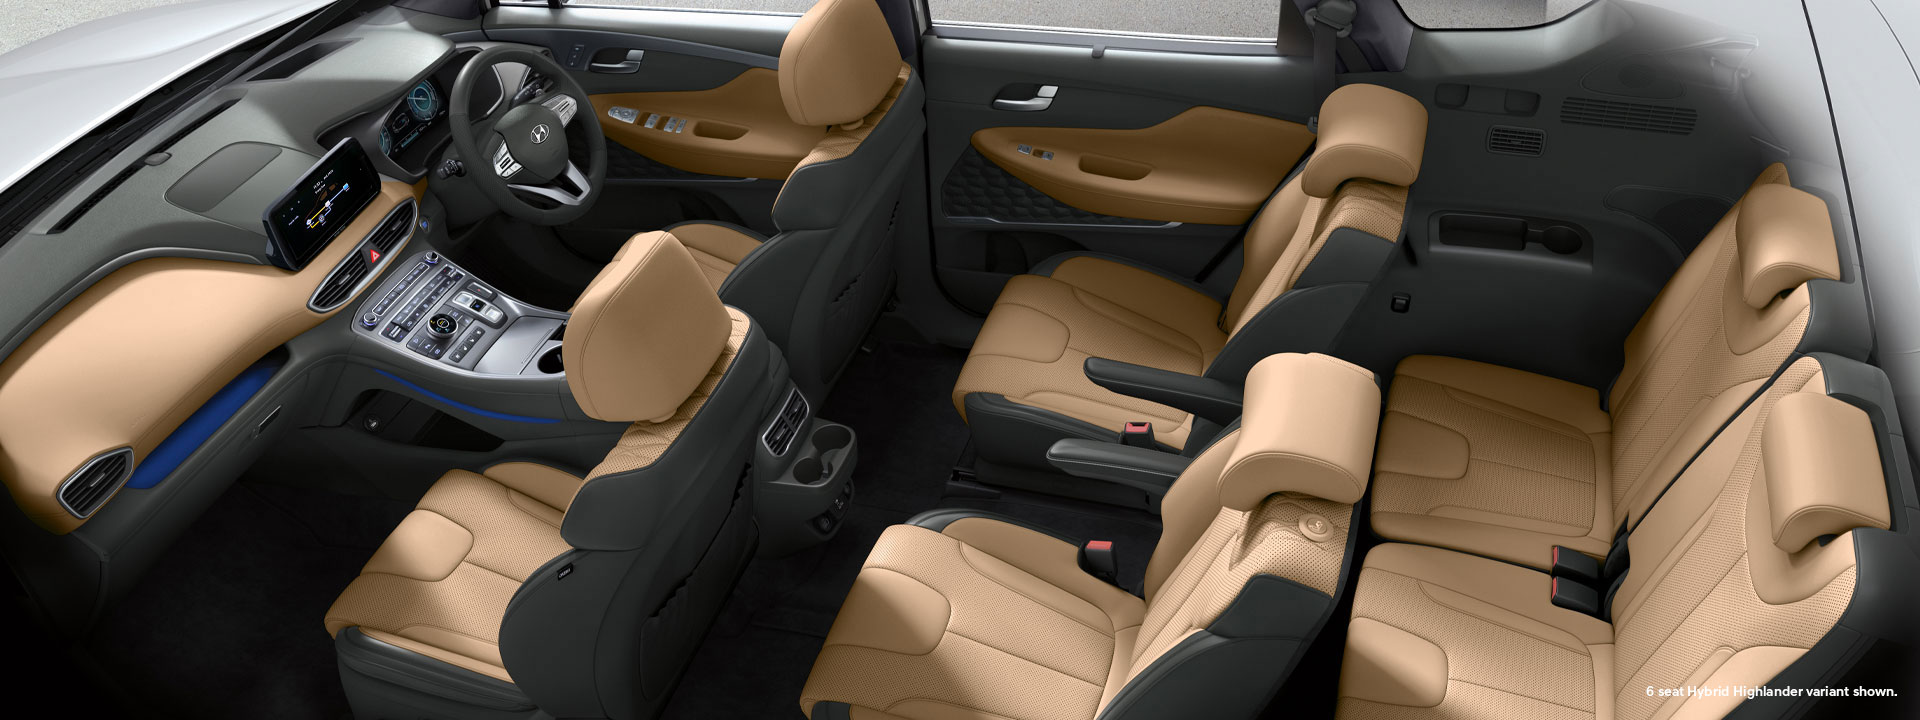 An interior that invites peace and complete comfort. Image